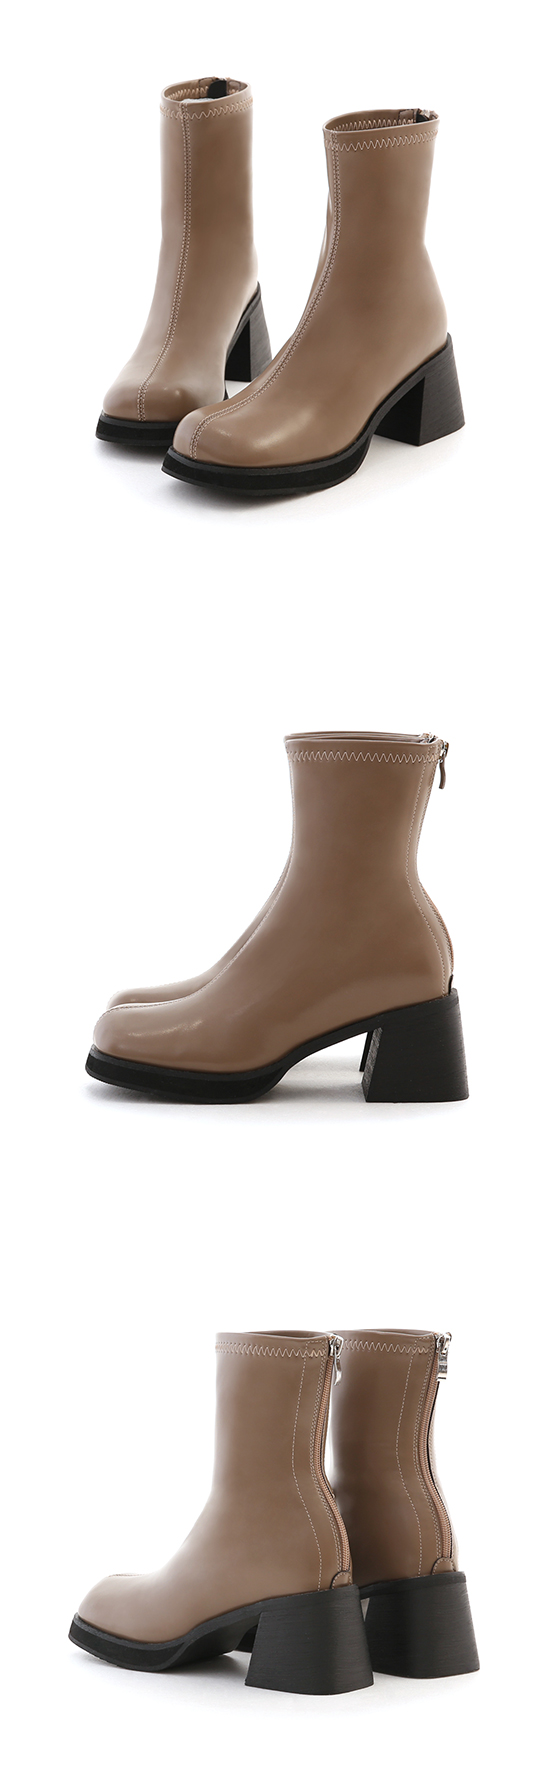 Round Toe Stitching Thick Sole Slimming Boots Mocha grey